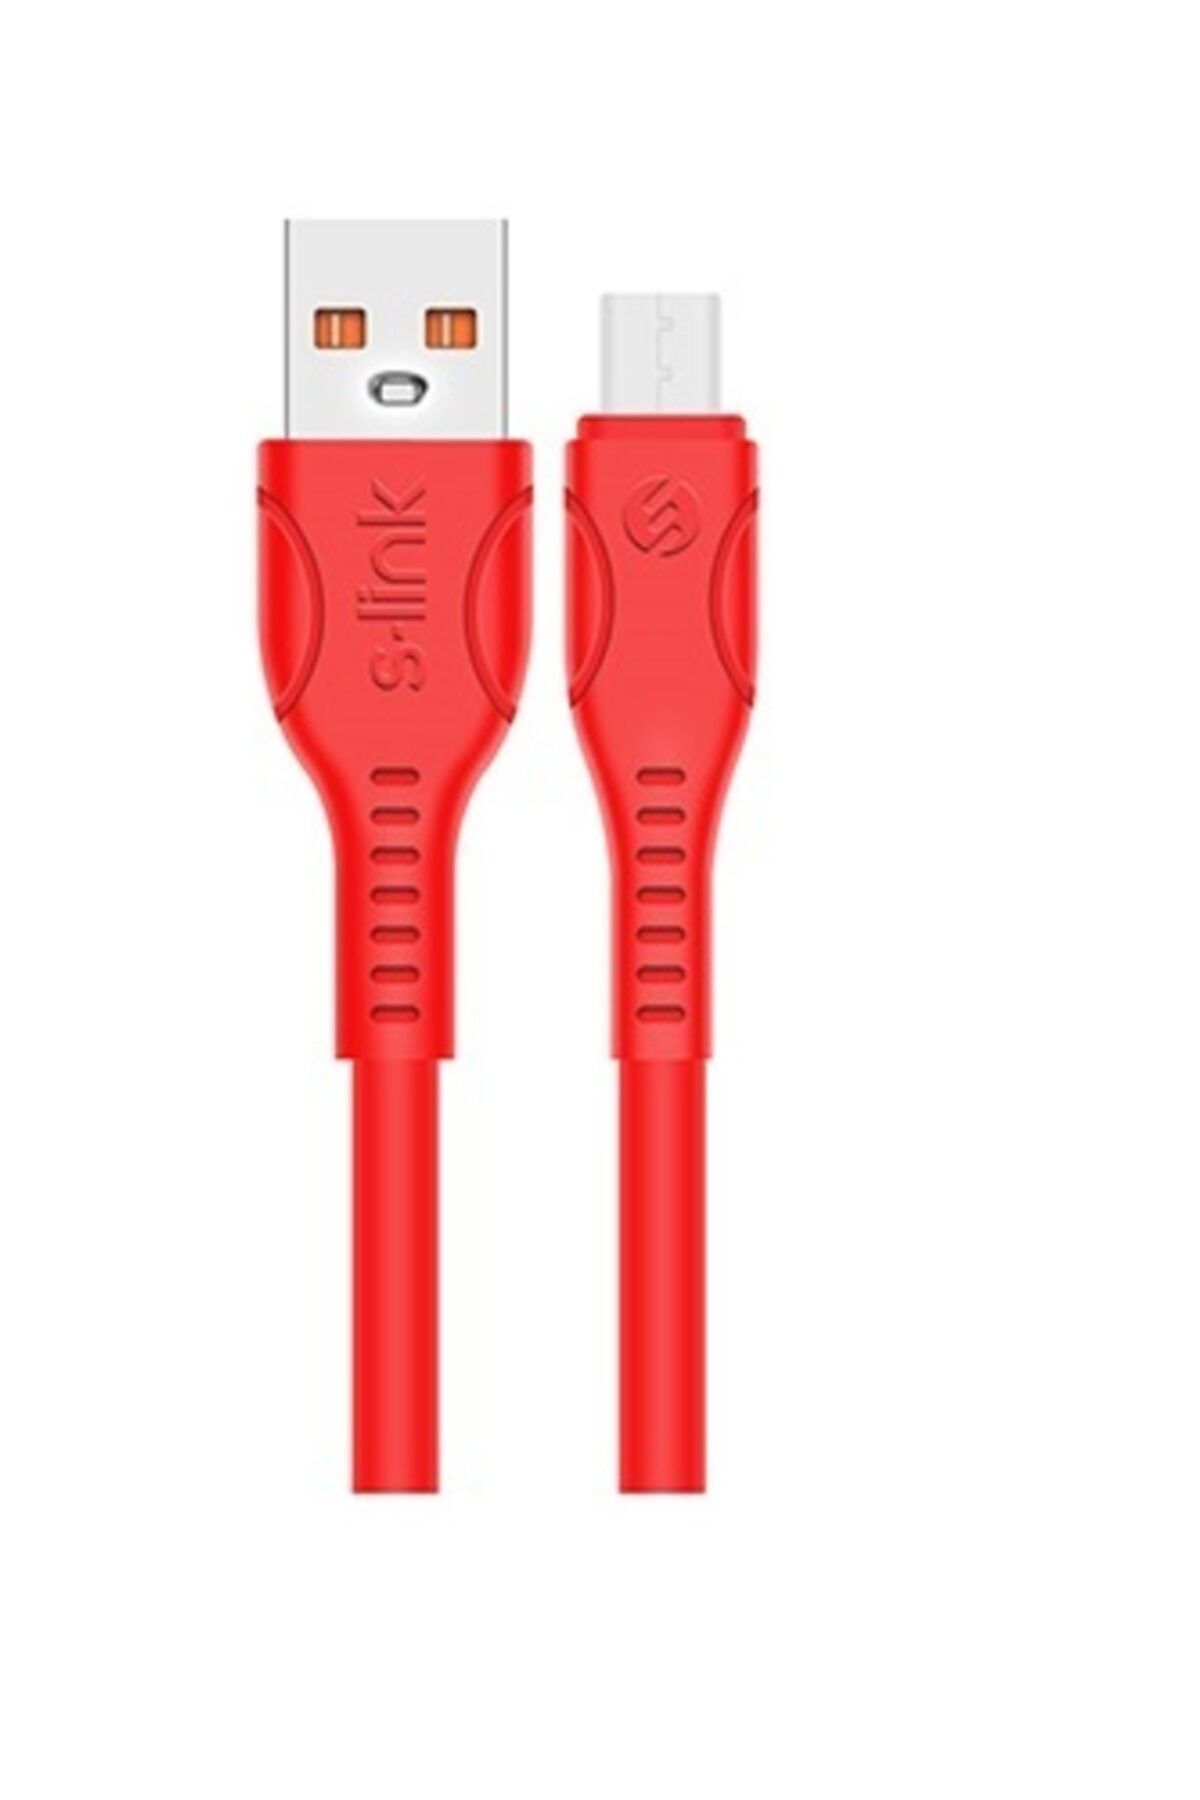 S-Link Swapp Fast Charge Micro Usb Cable 2.4a Şarj Ve Data Kablosu